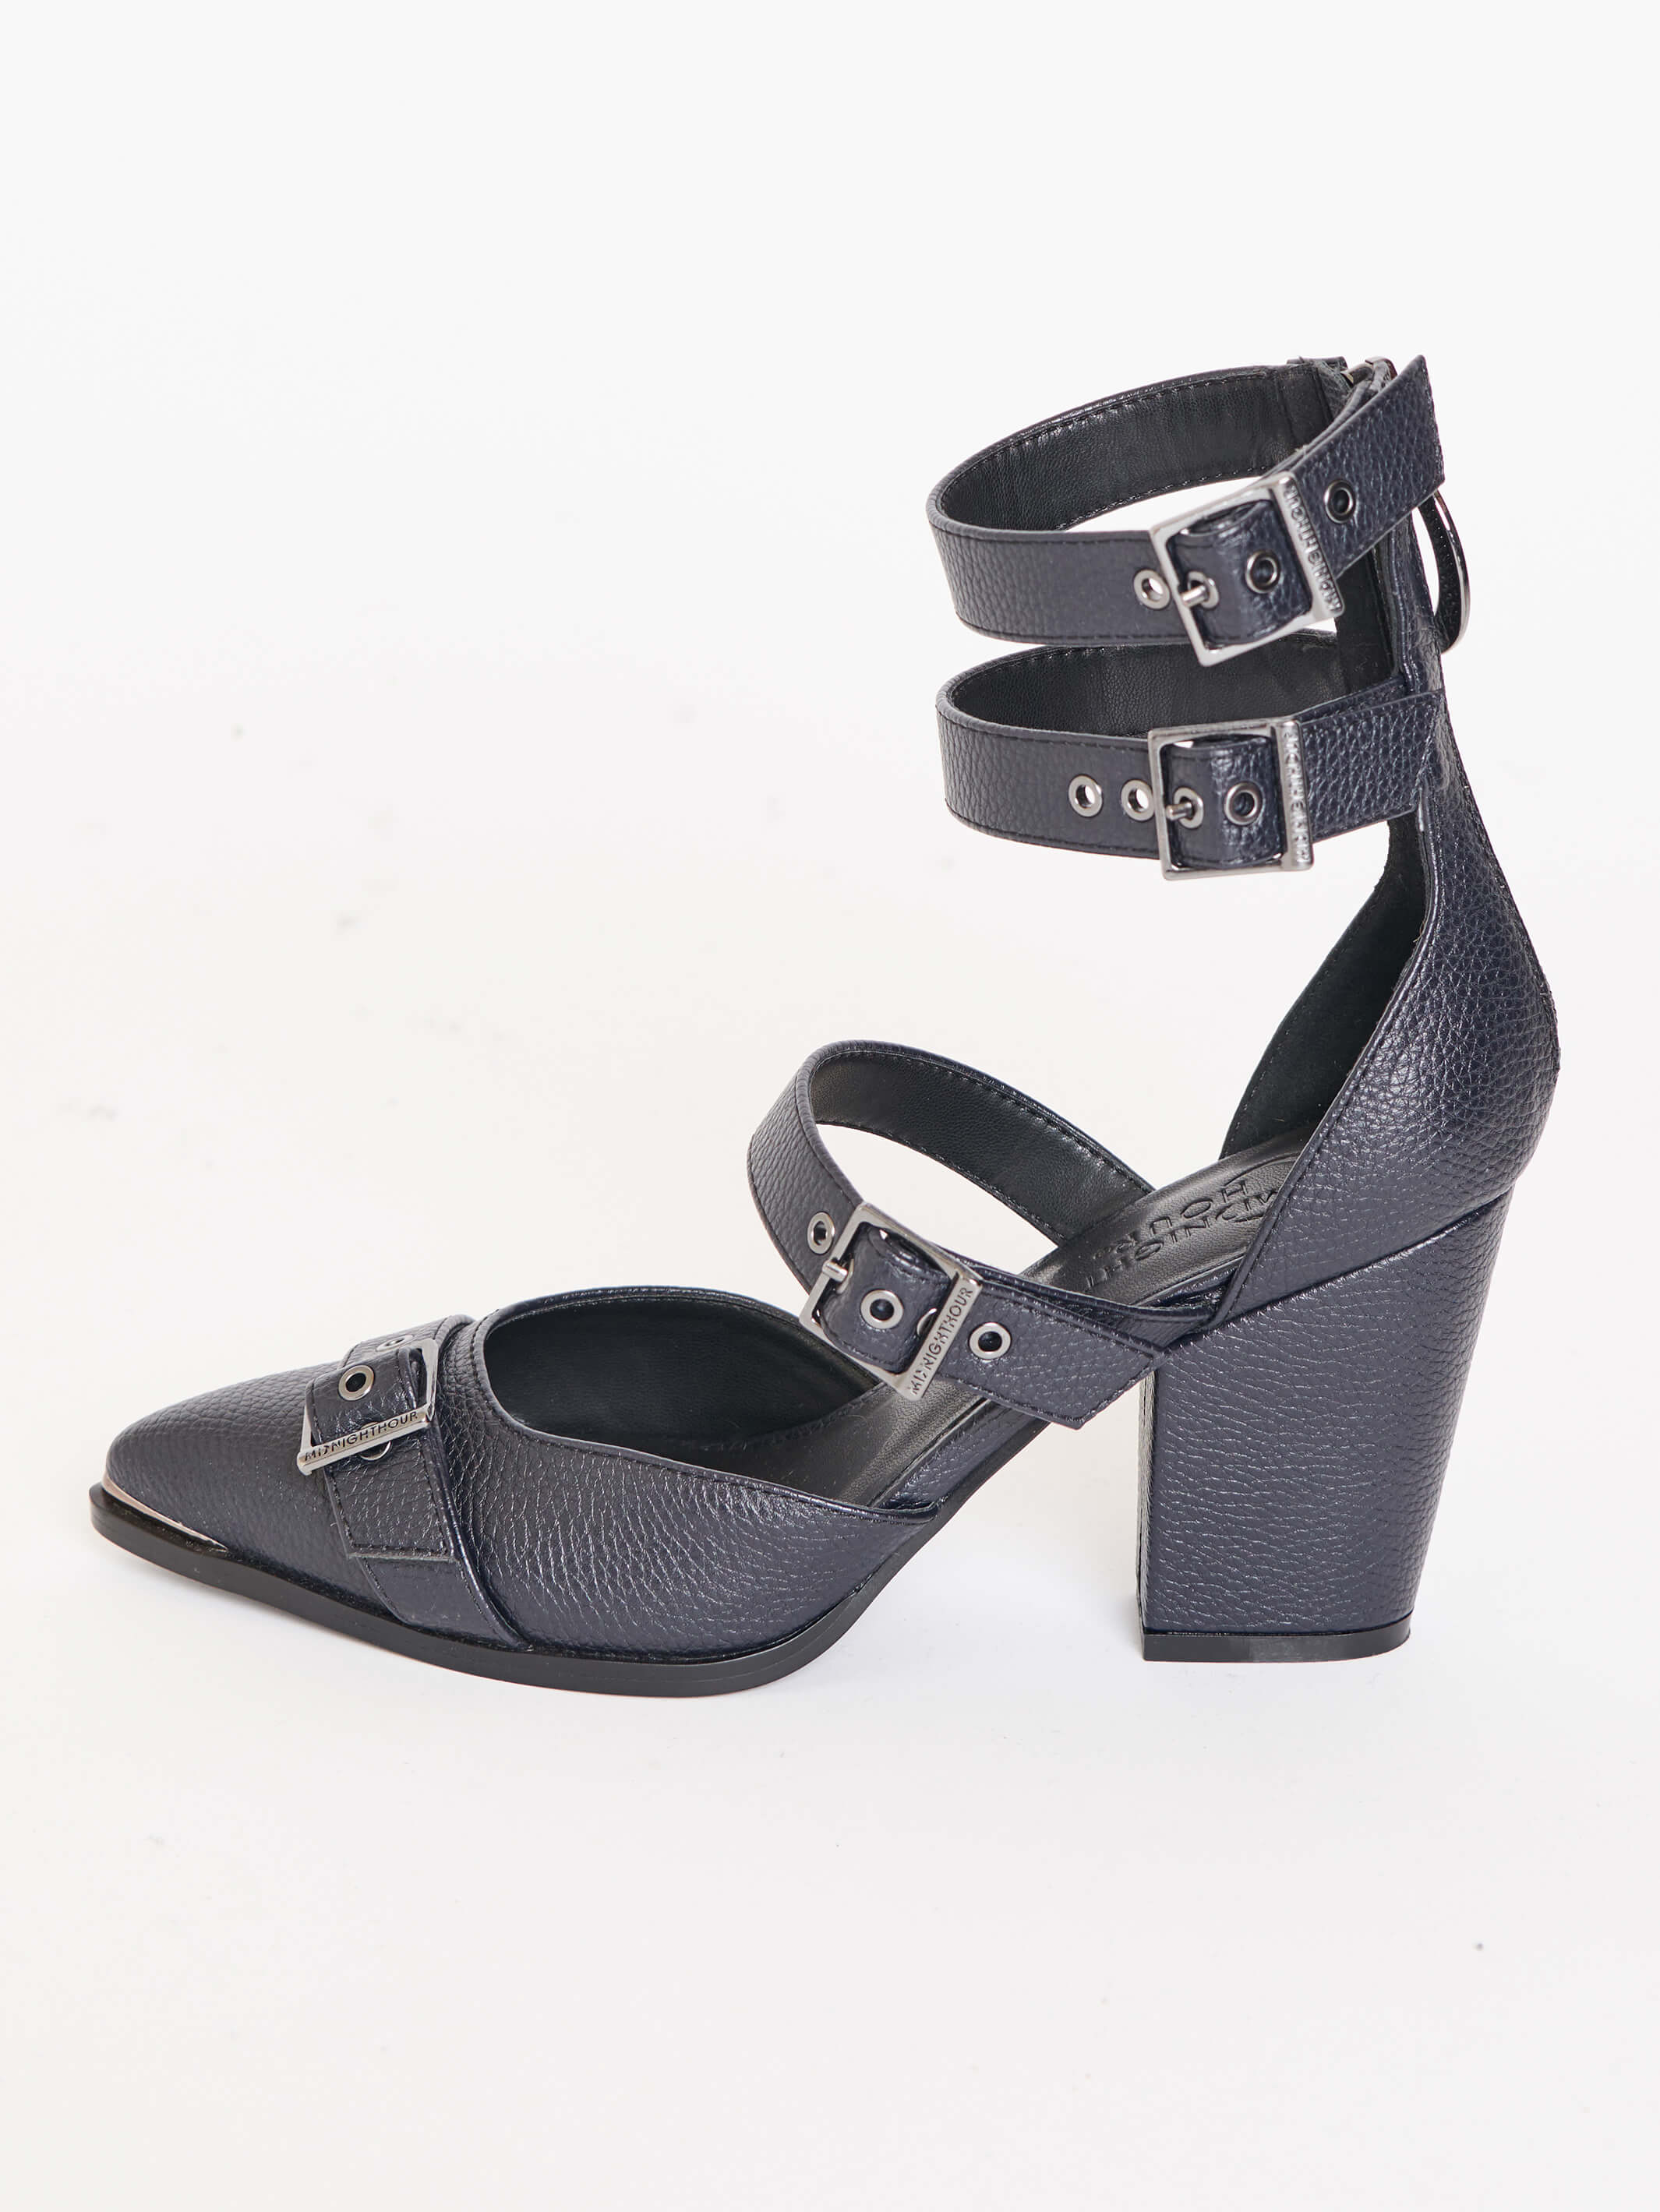 pointed toe block heels with buckle details and back zipper